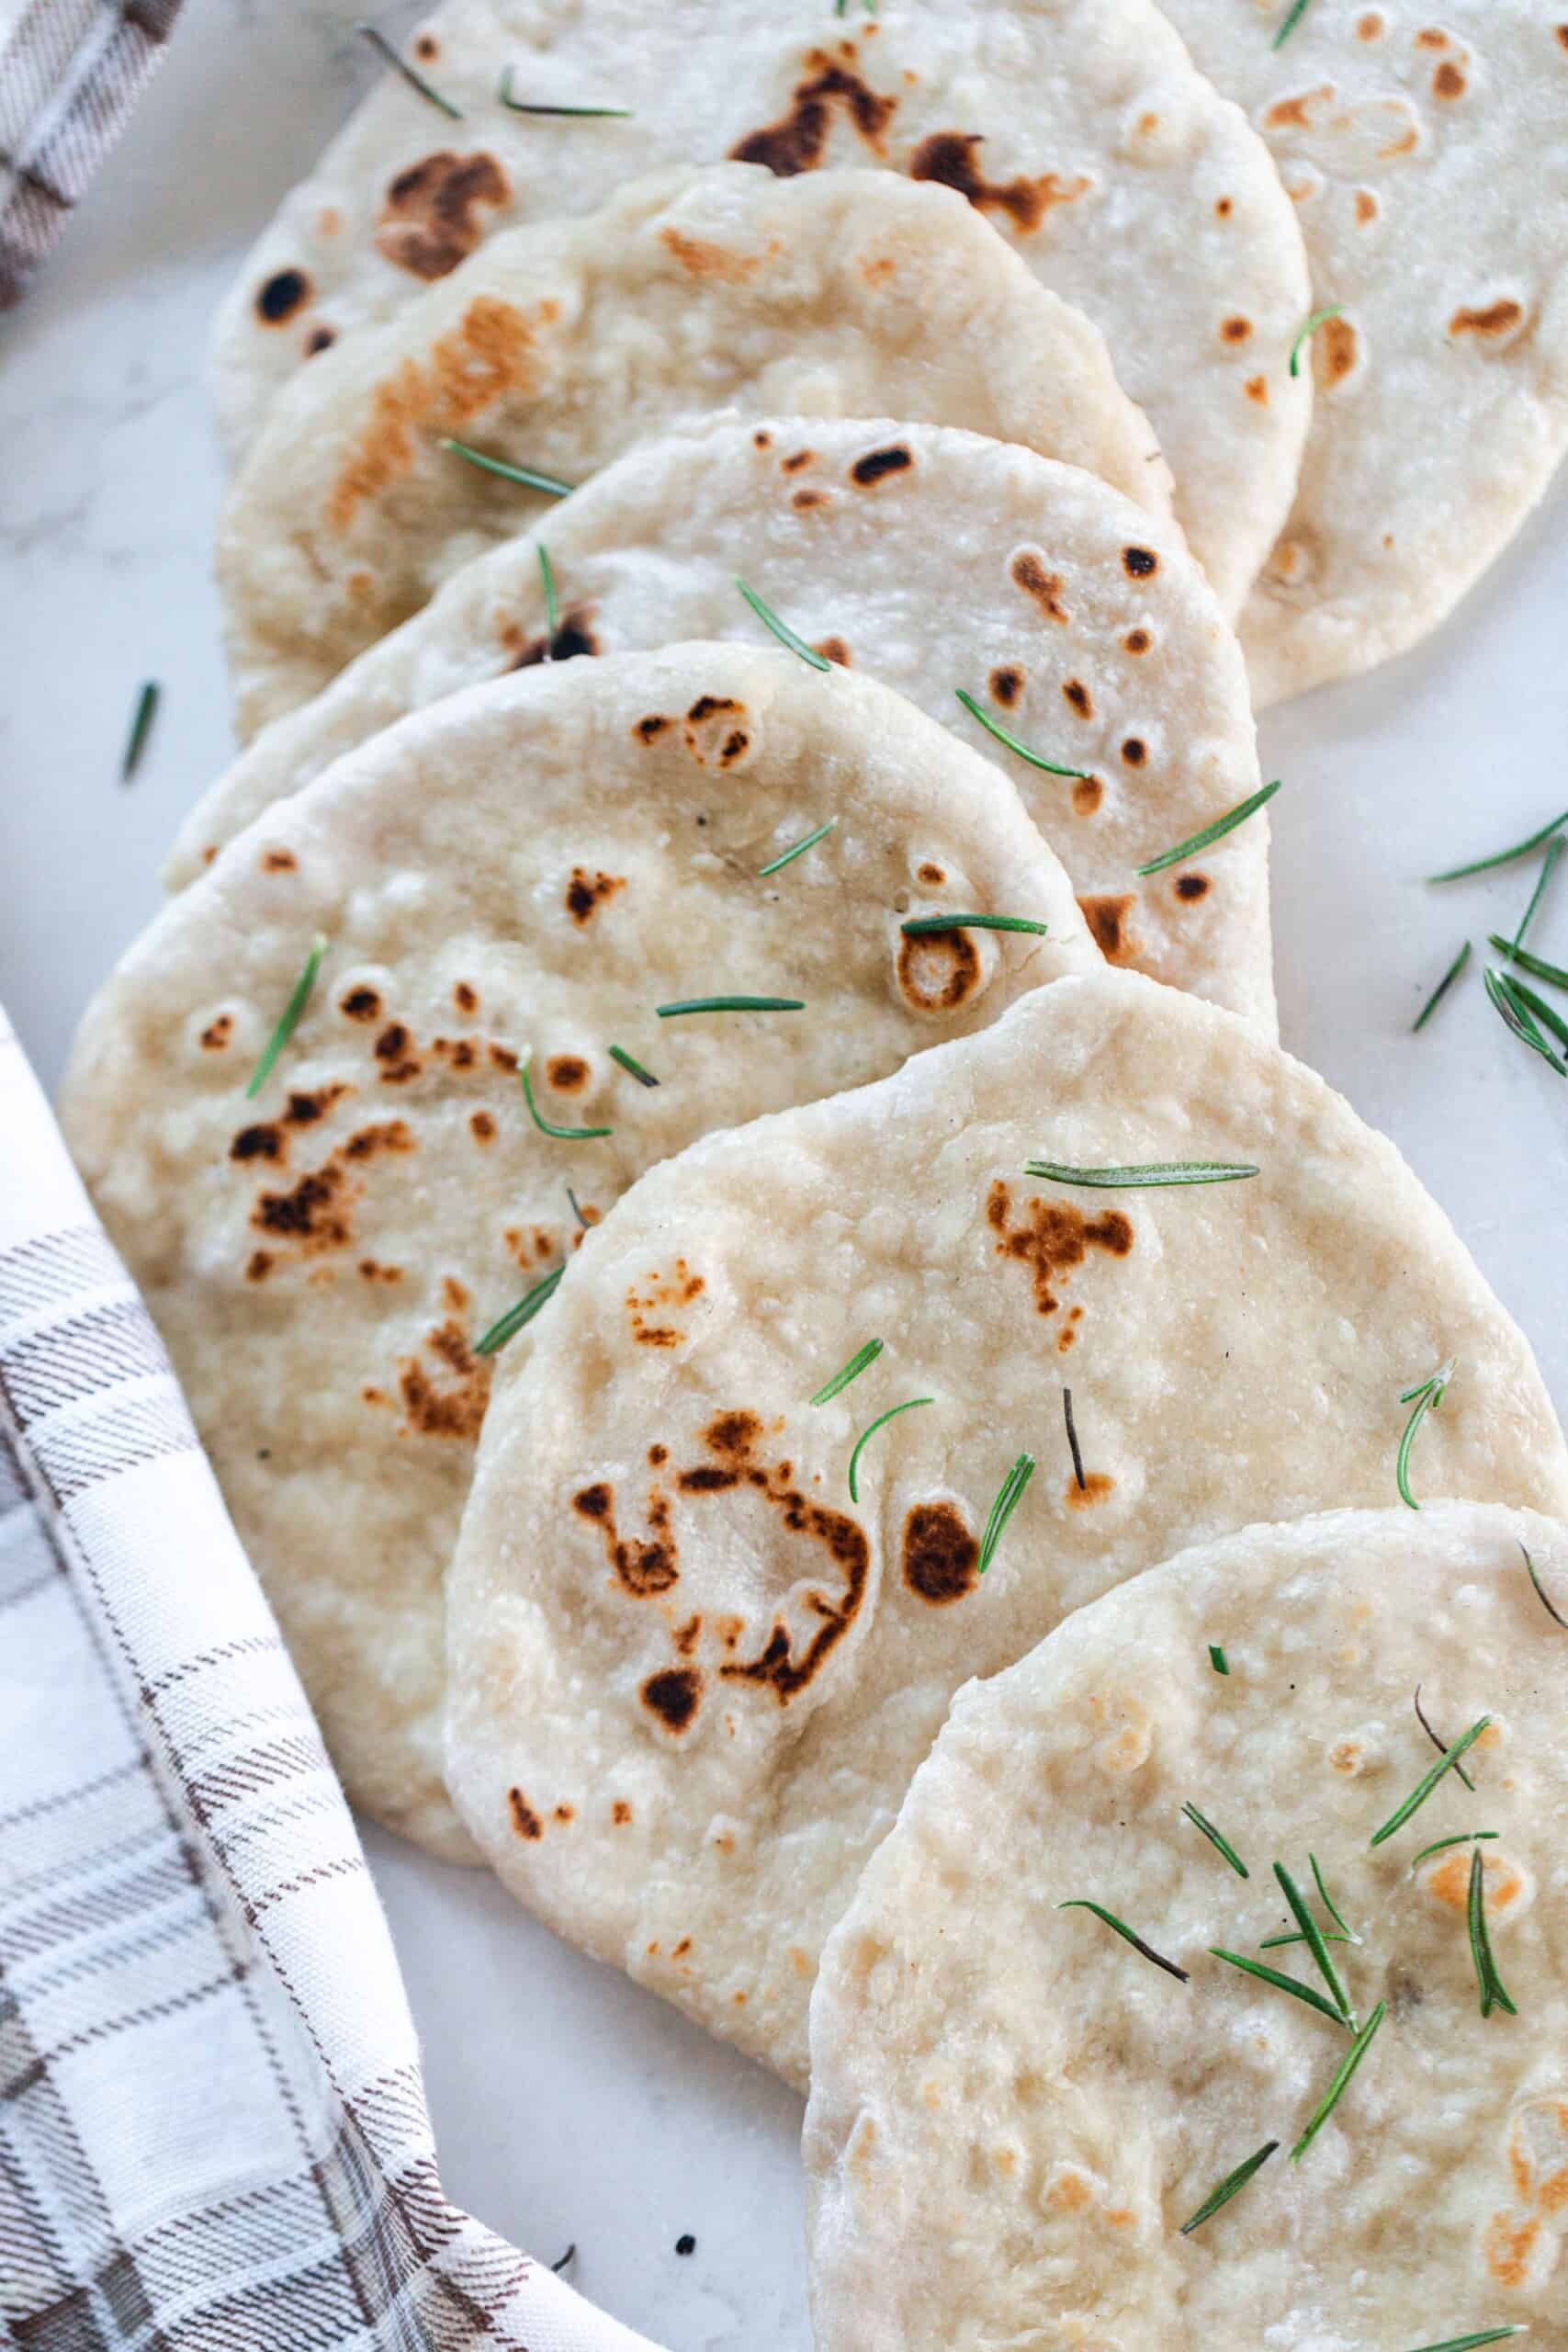 sourdough flat bread topped with fresh rosemary layered in a line on a white quartz countertop with a plaid towel to the left